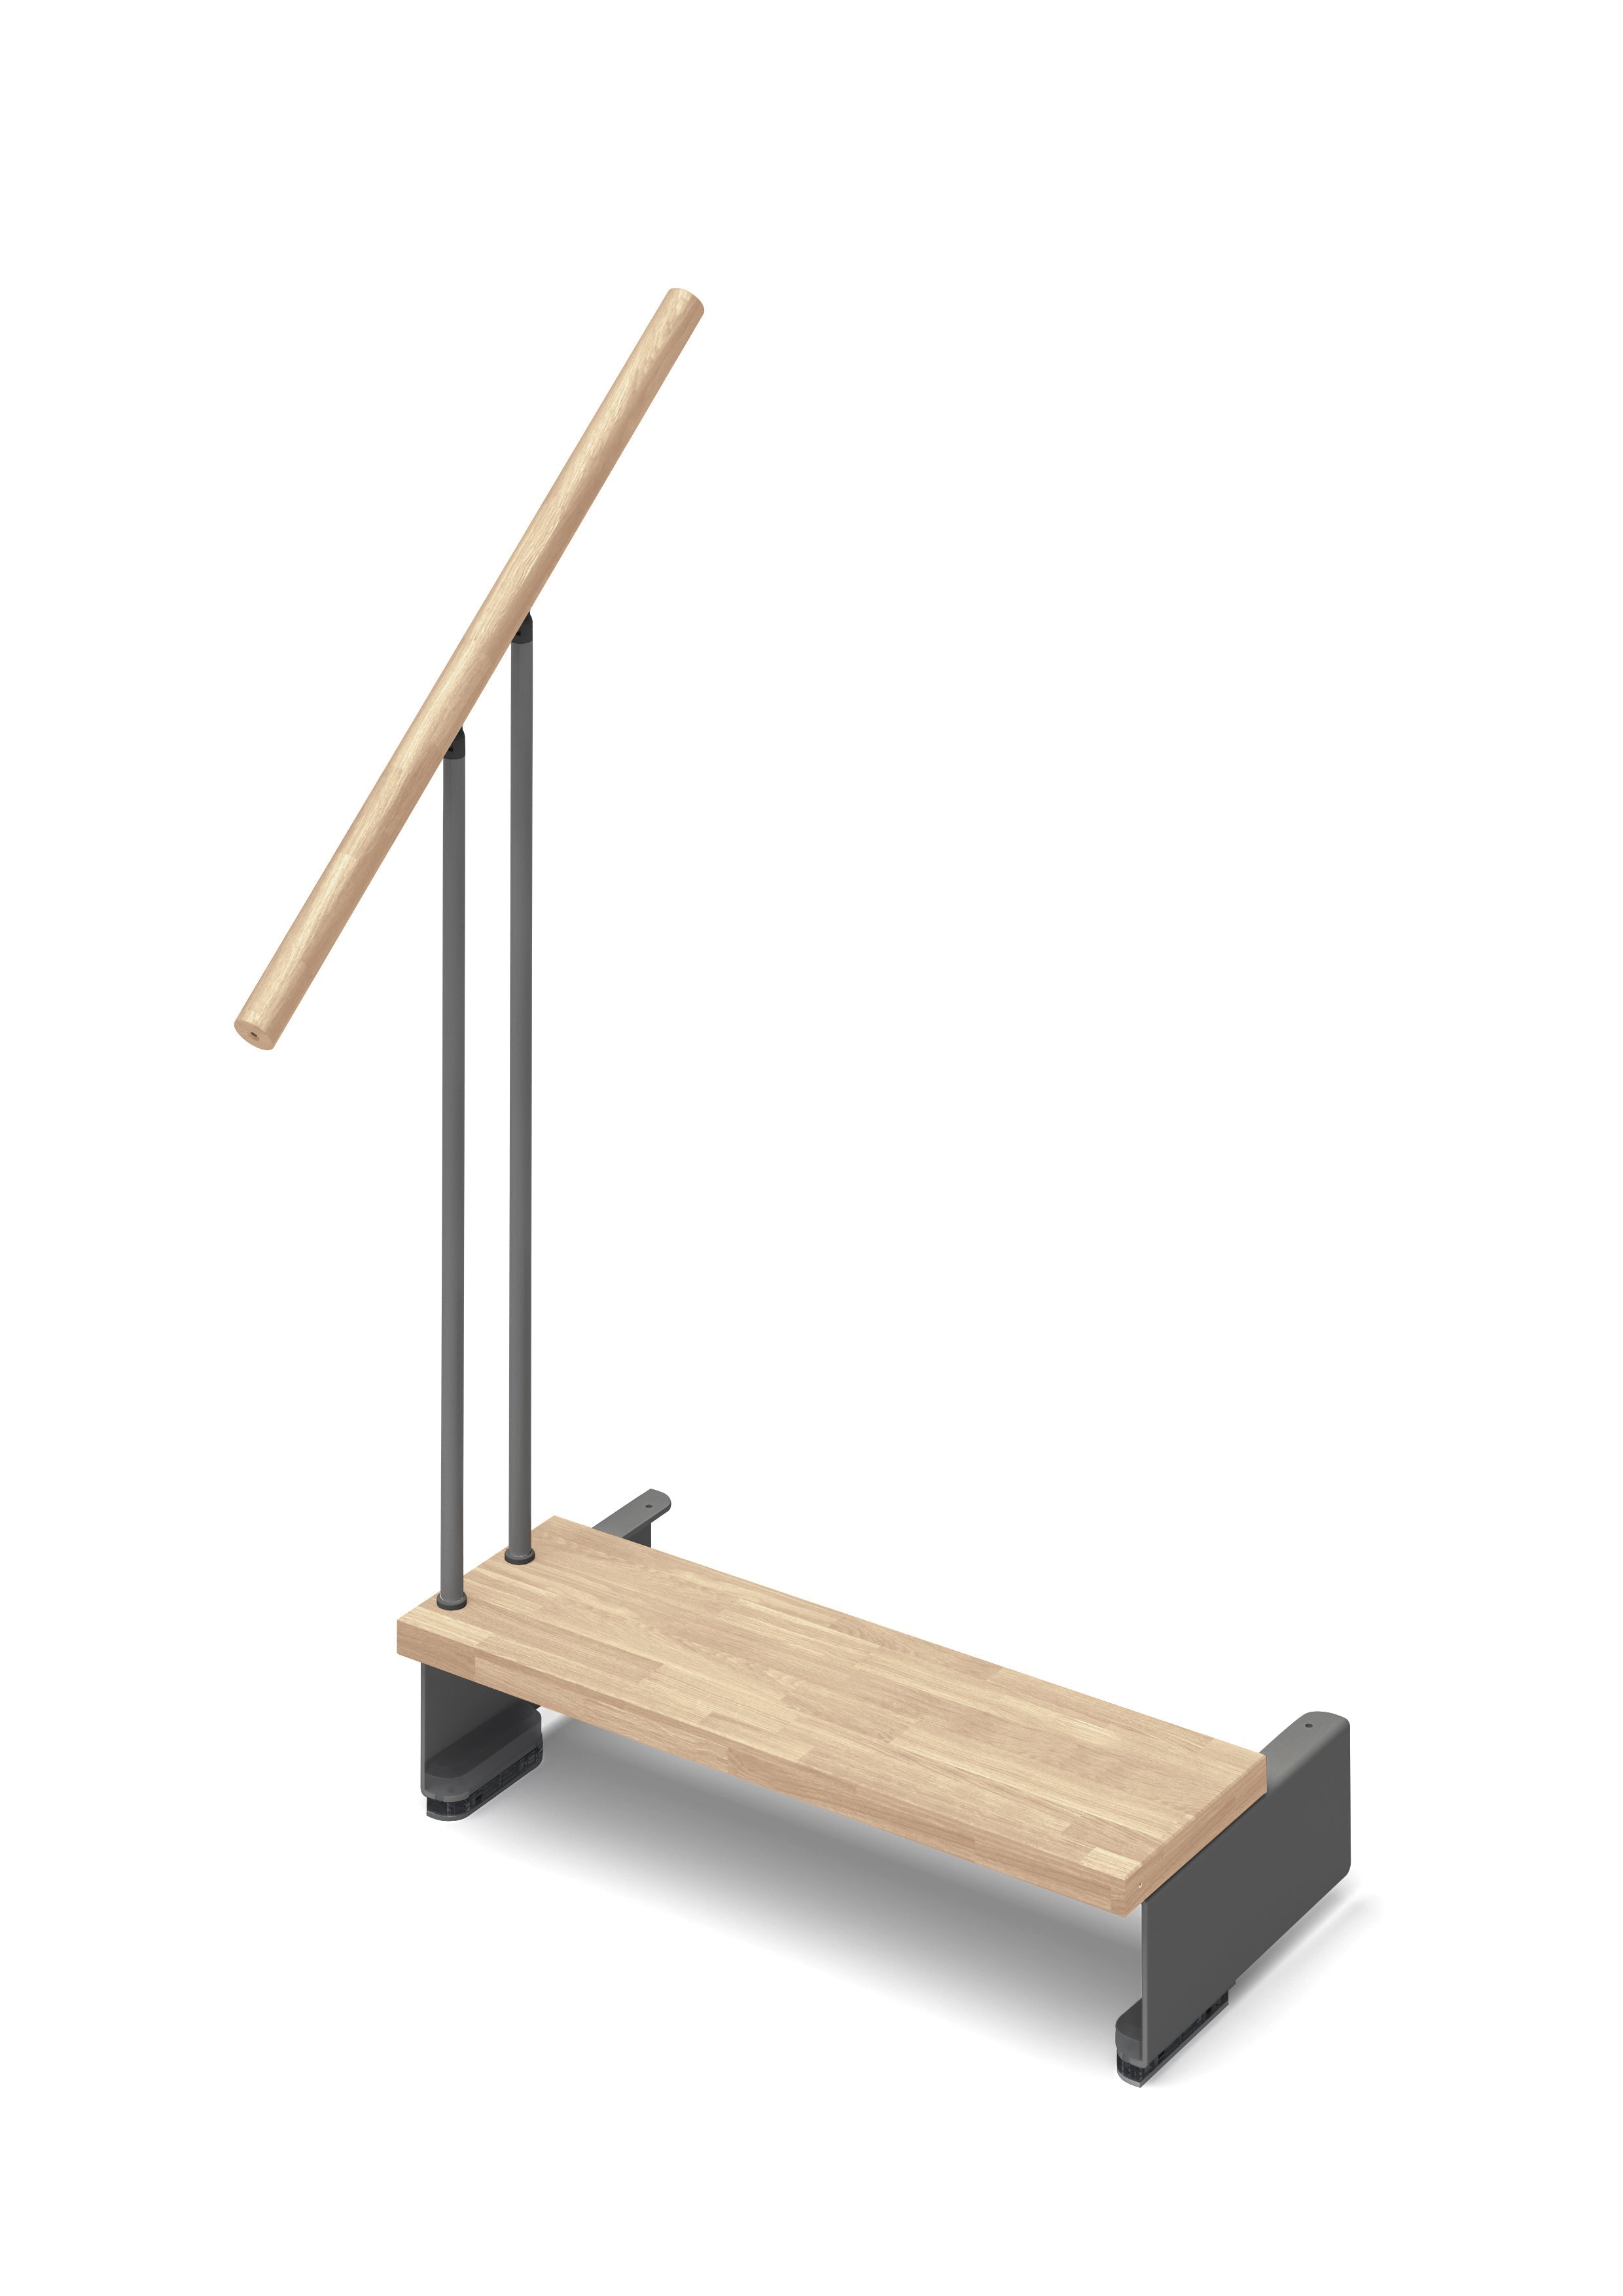 Additional step Adapta 74cm (with structure and railing) - Sand 27